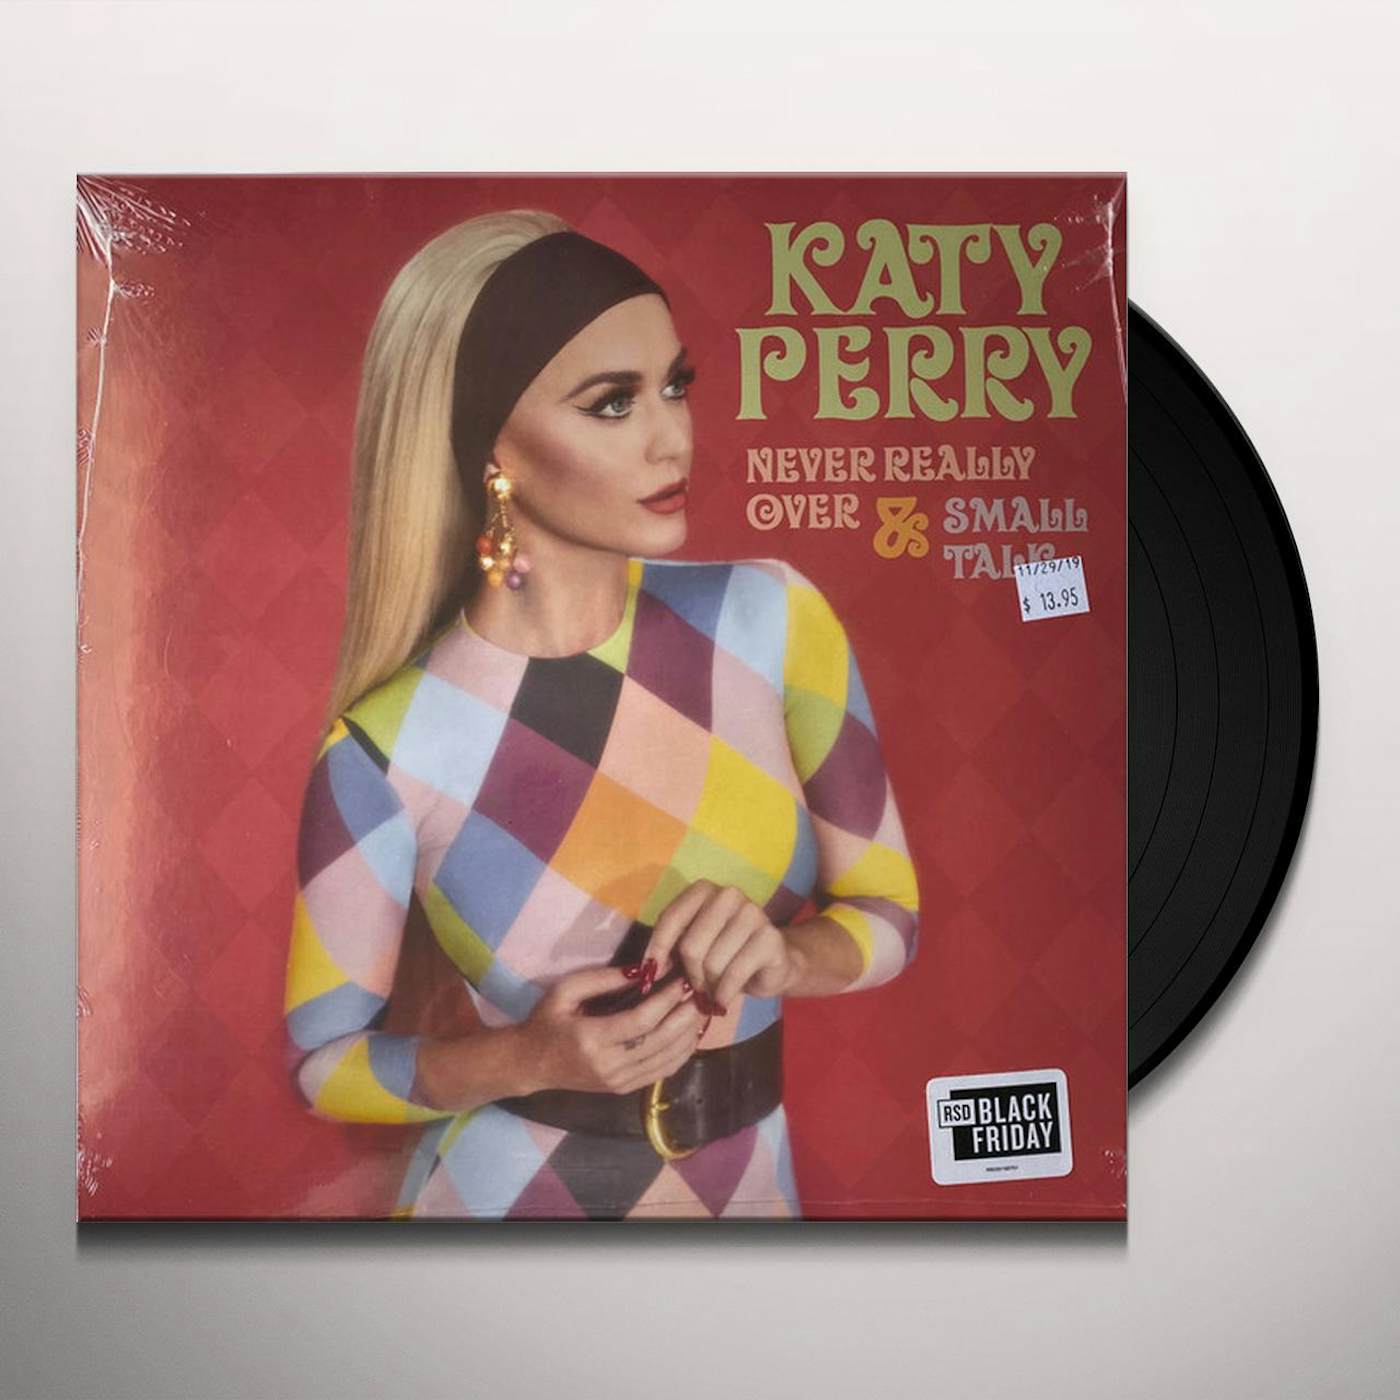 Psychologisch Opsommen bodem Katy Perry NEVER REALLY OVER / SMALL TALK Vinyl Record